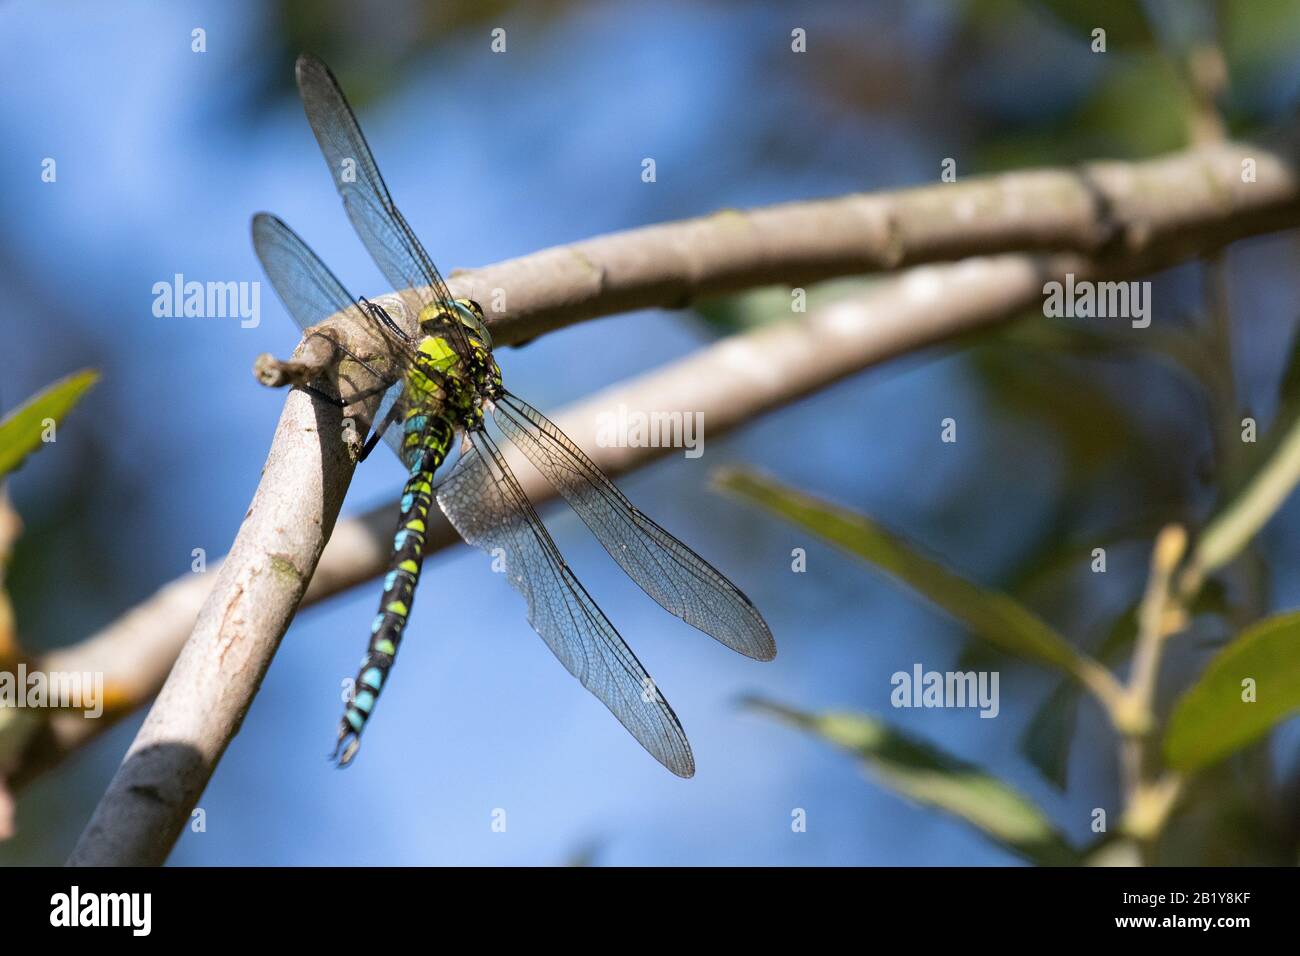 A beautiful dragonfly resting on a branch in the sunshine Stock Photo